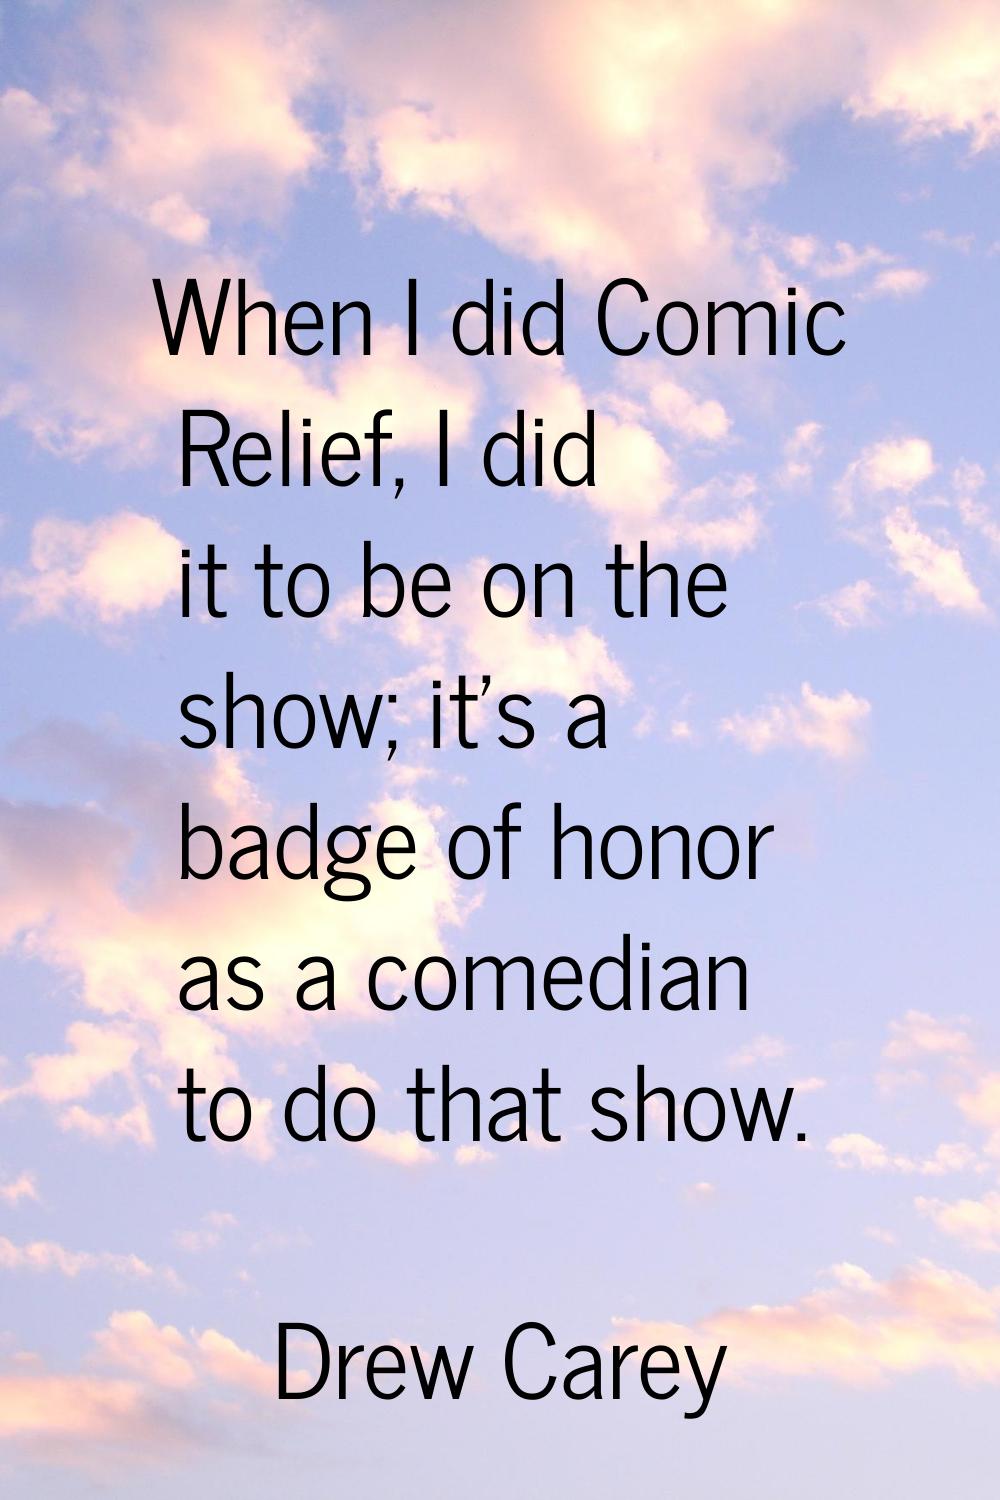 When I did Comic Relief, I did it to be on the show; it's a badge of honor as a comedian to do that